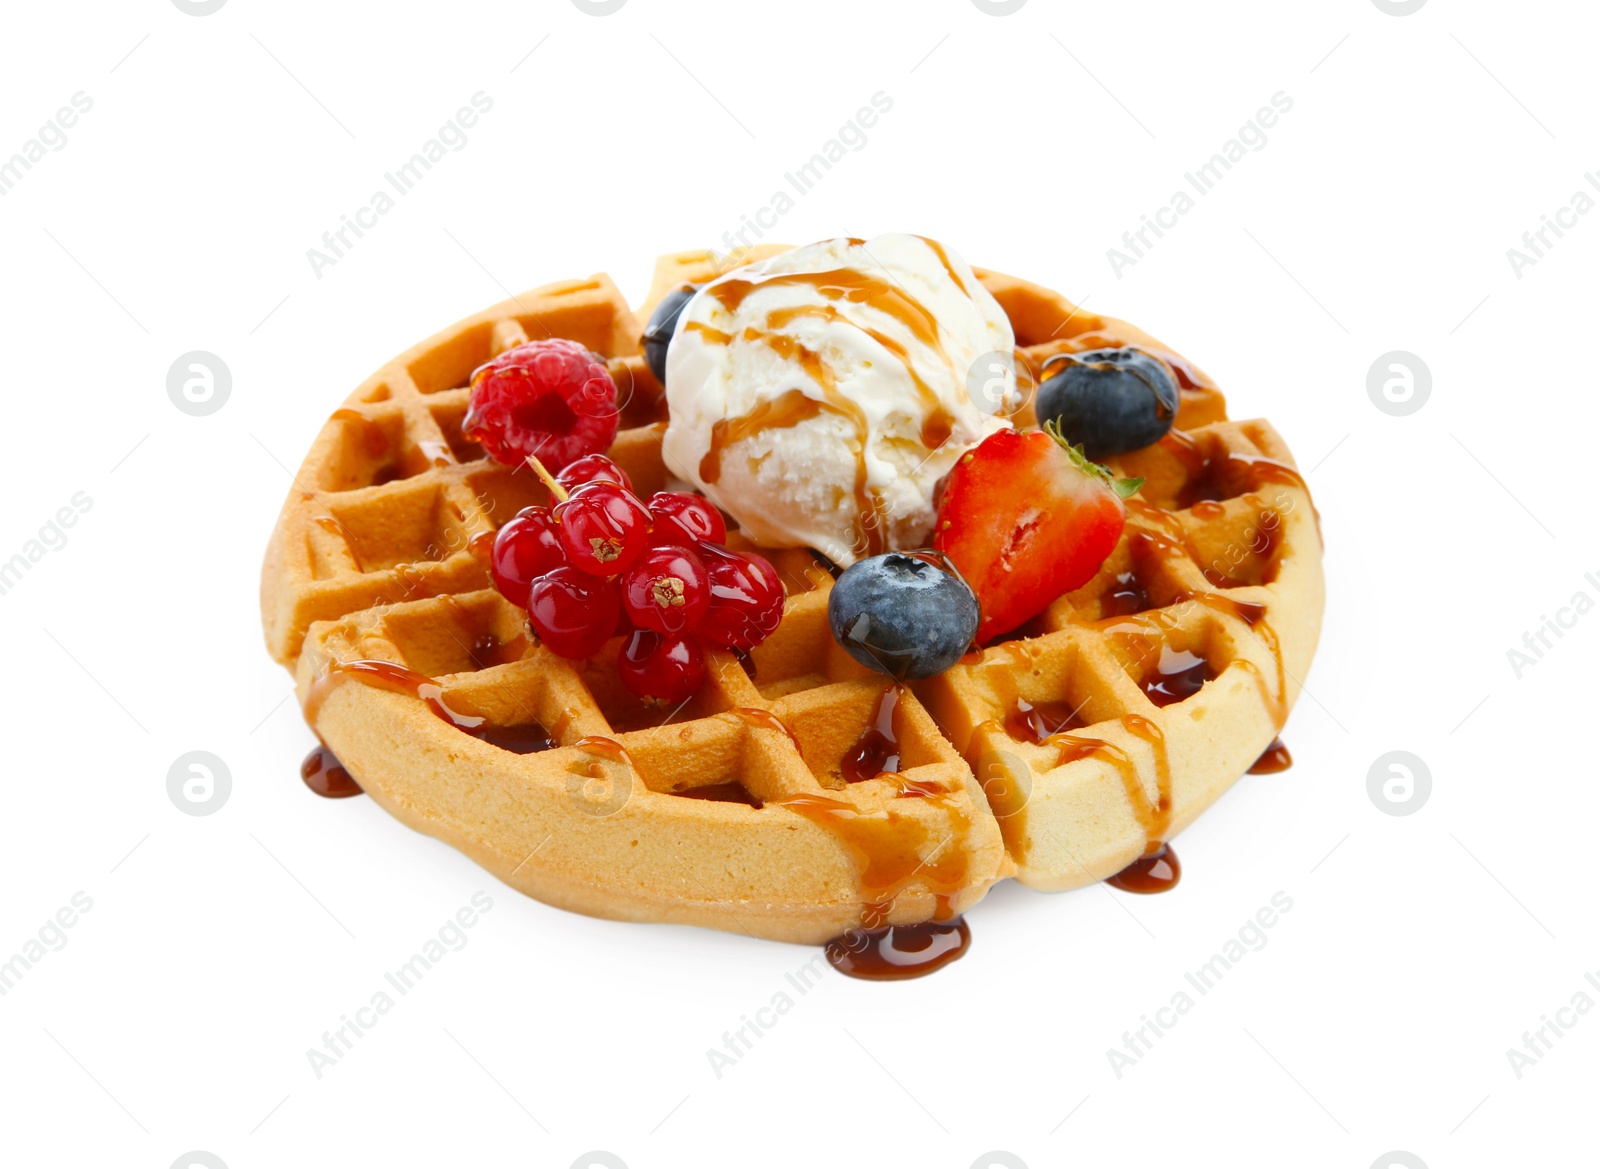 Photo of Tasty Belgian waffle with ice cream, berries and caramel syrup on white background